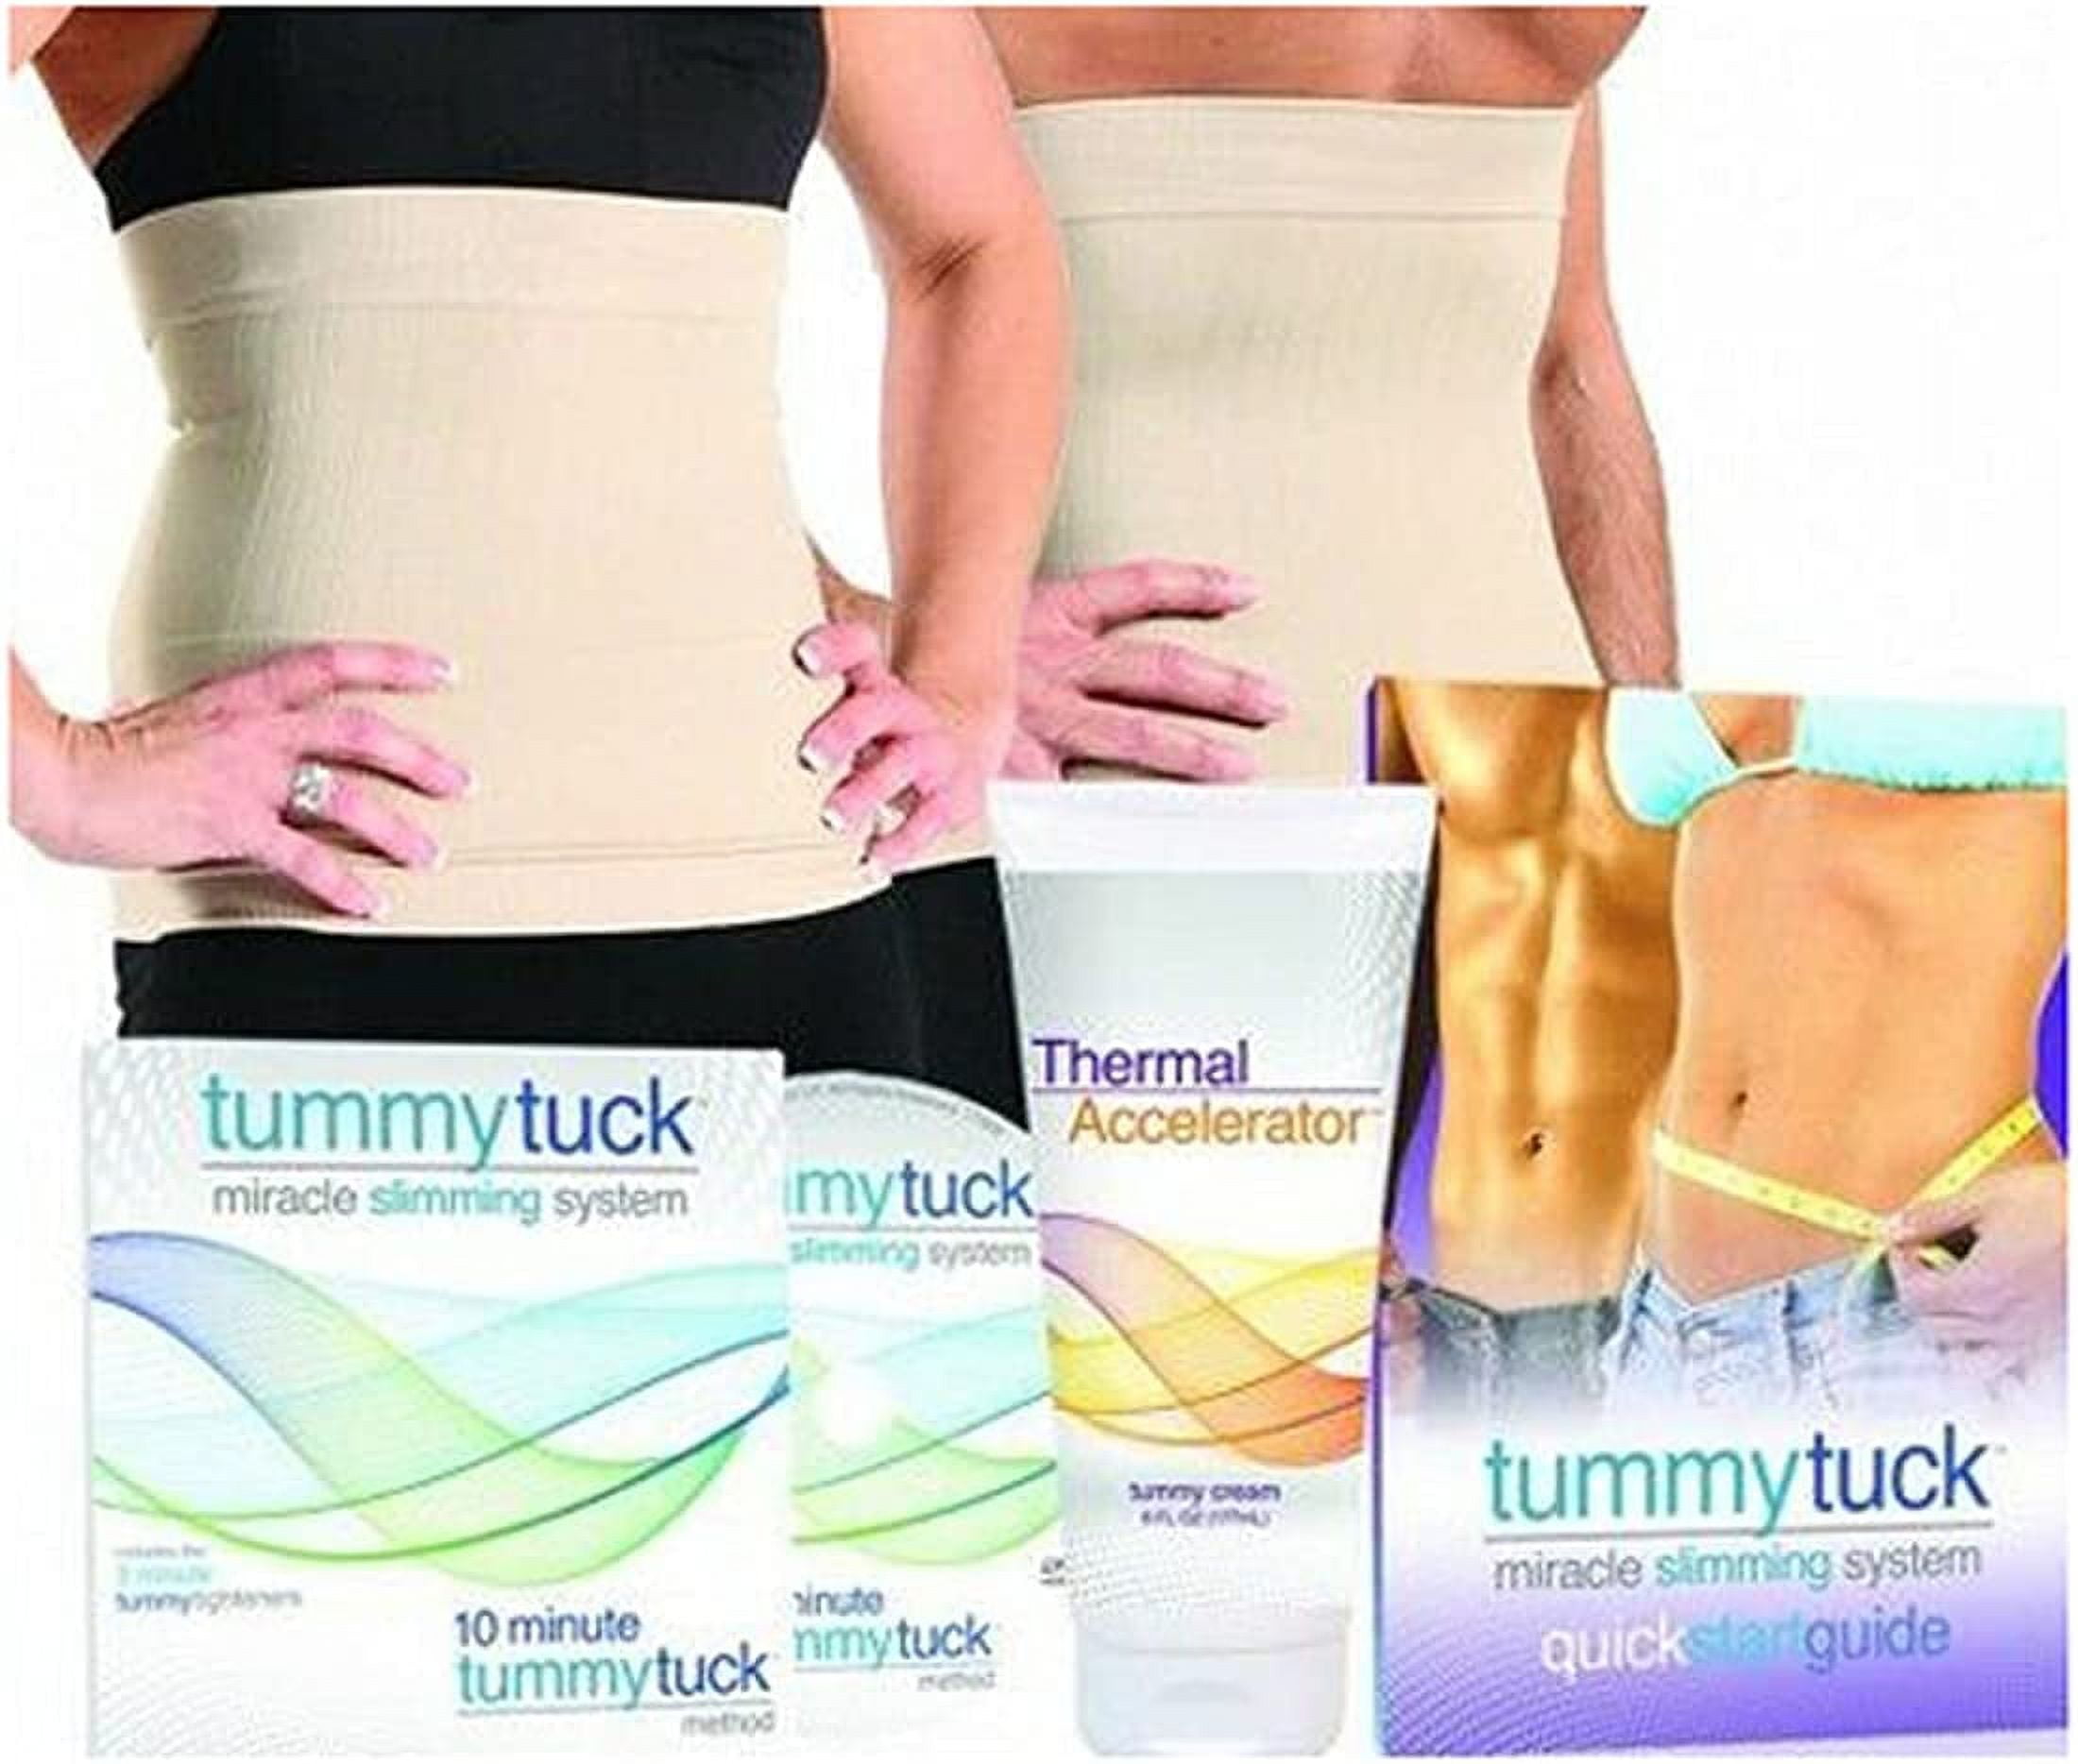 Tummy Tuck Miracle Slimming System Belt Size 1 2 3 TRUSTED & ORIGINAL As on  TV 